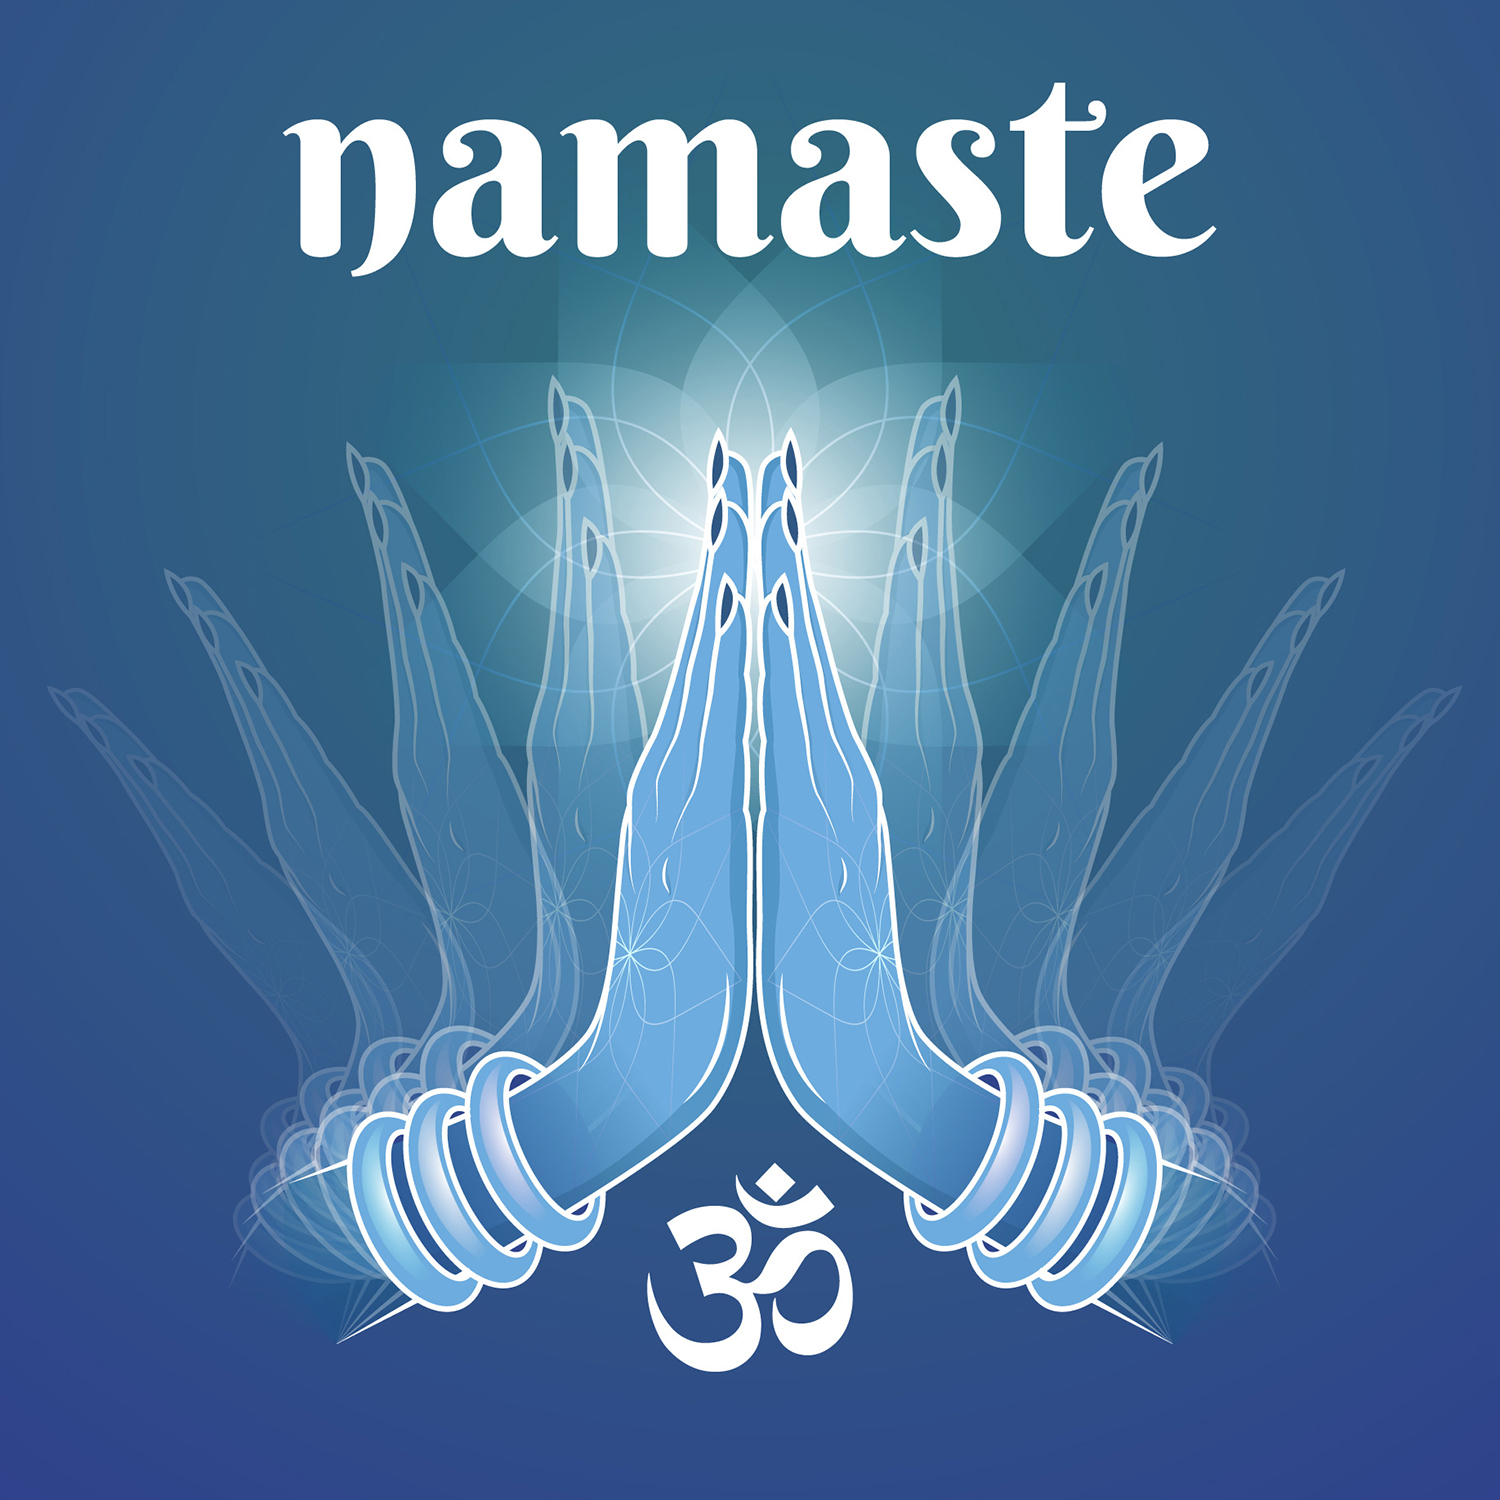 Buy Blue With Namaste Greeting Wallpaper Online In India At Best